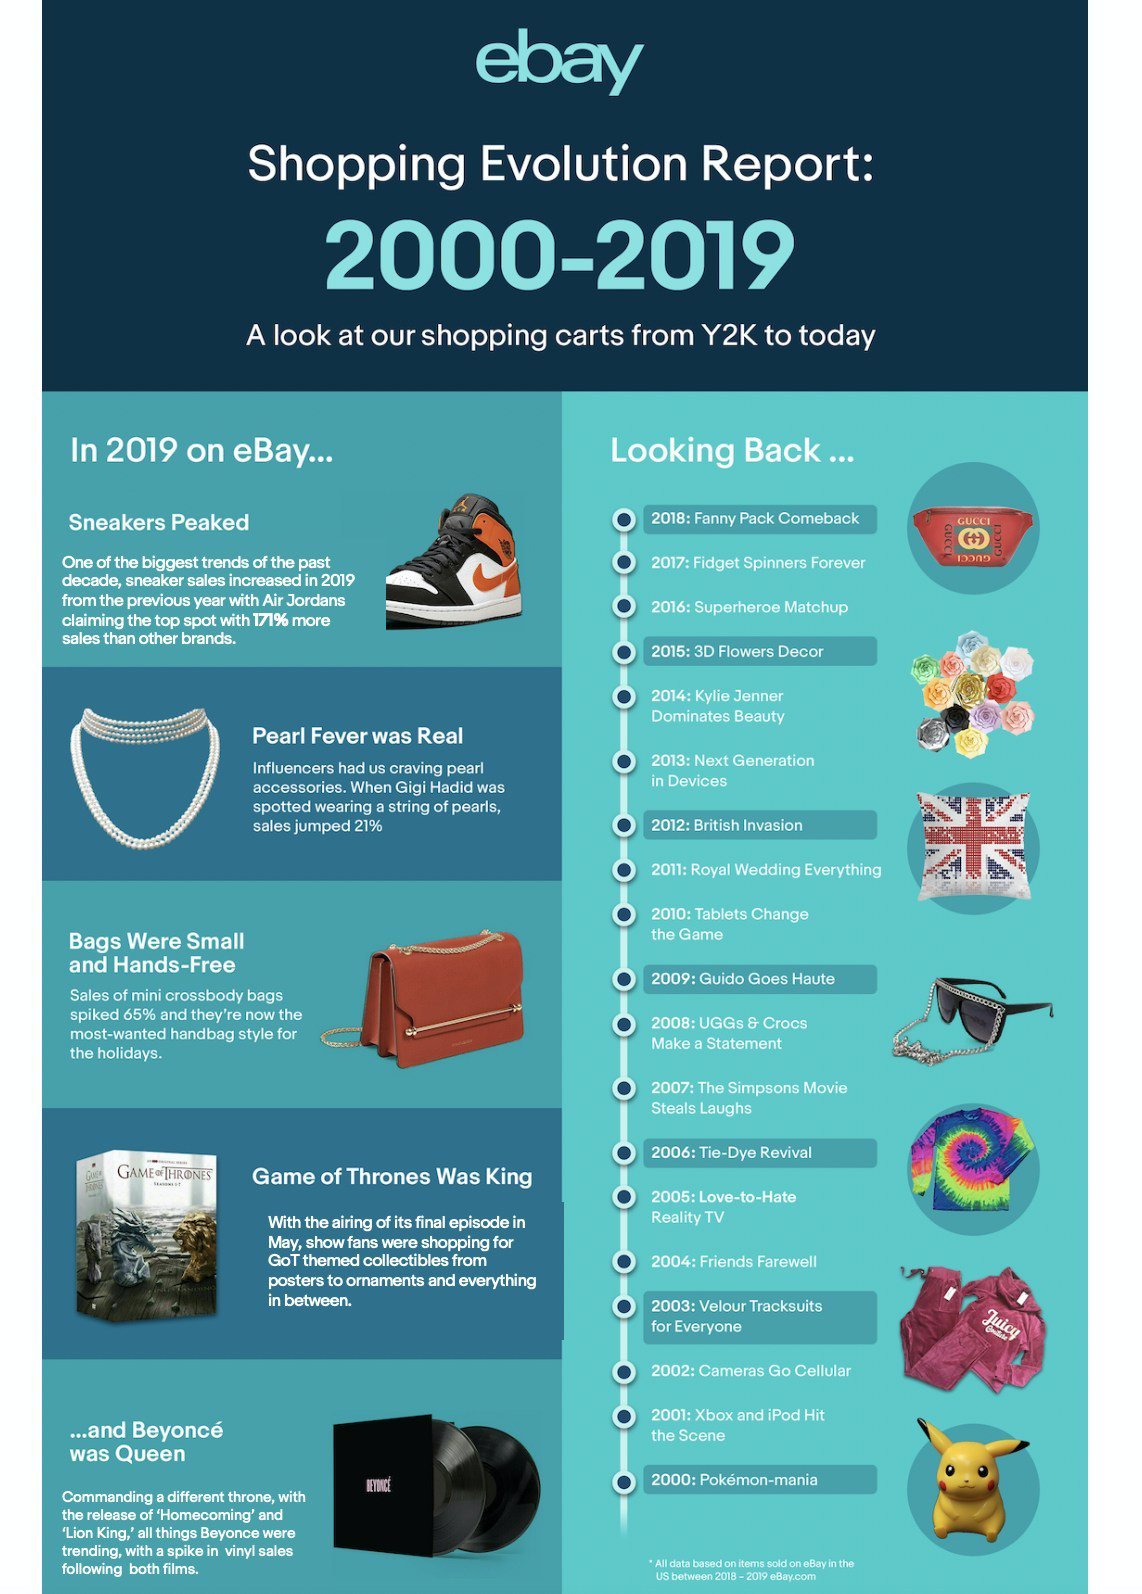 Top trends that shaped past two decades (according to eBay)